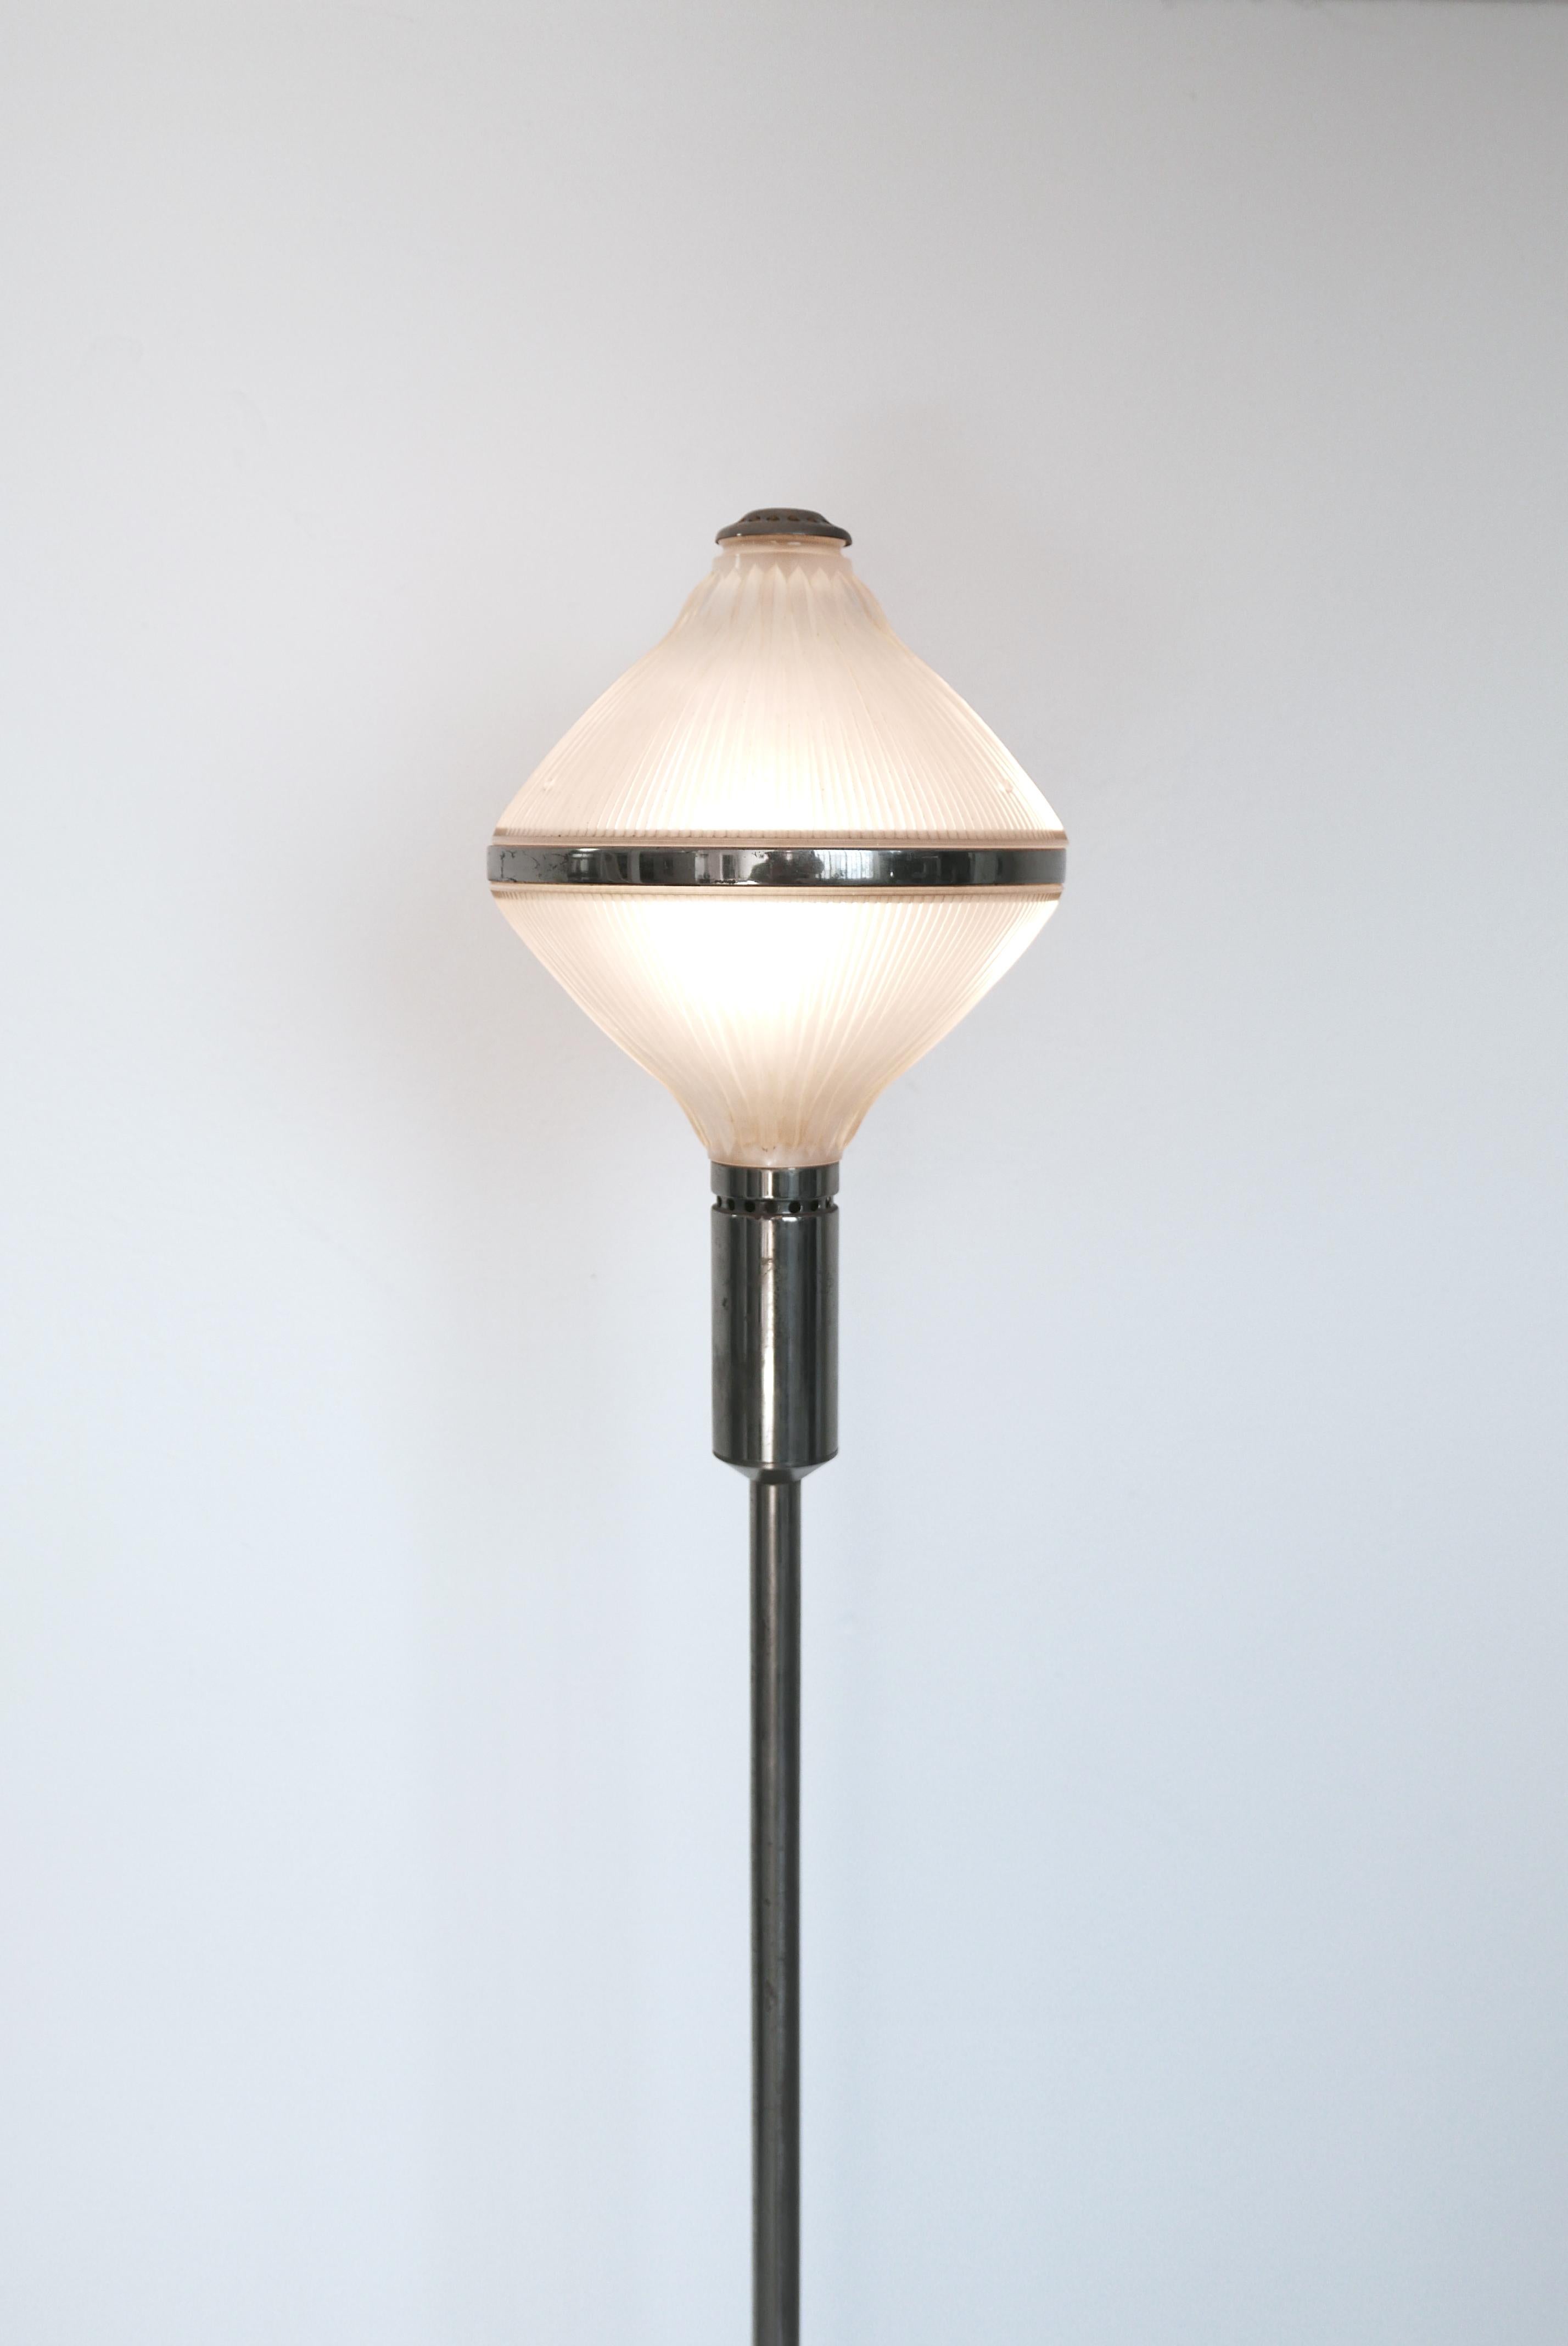 Mid-20th Century Rare Vintage Collectible Italian Polimnia Floor Lamp by Studio BBPR for Artemide For Sale